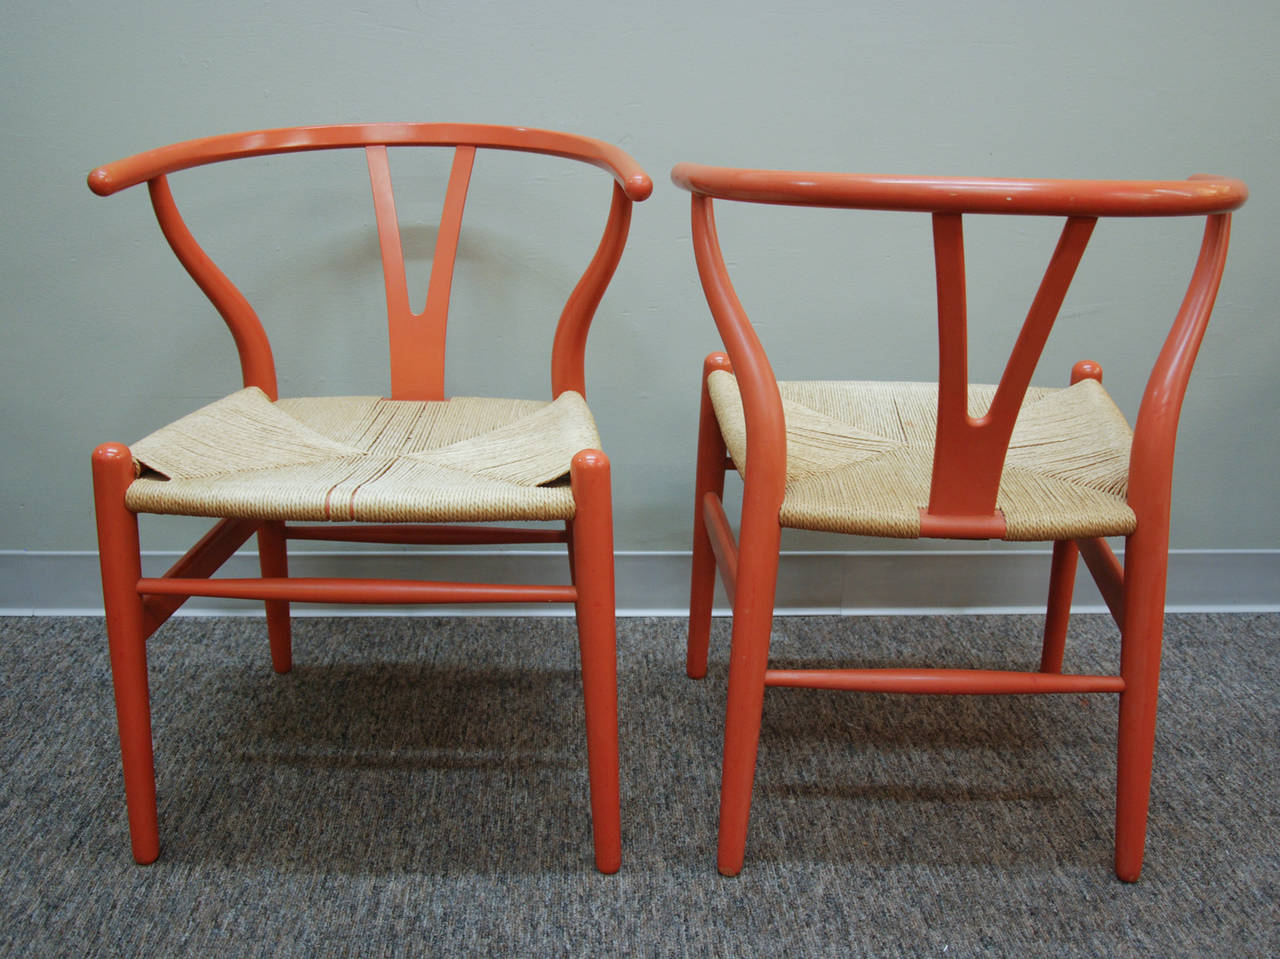 A classic pair of early production CH-24 wishbone chairs designed by Hans Wegner and manufactured by Carl Hansen & Son in the original and rare salmon lacquered finish with the original paper cord seat.  The chairs are often referred to as the Y